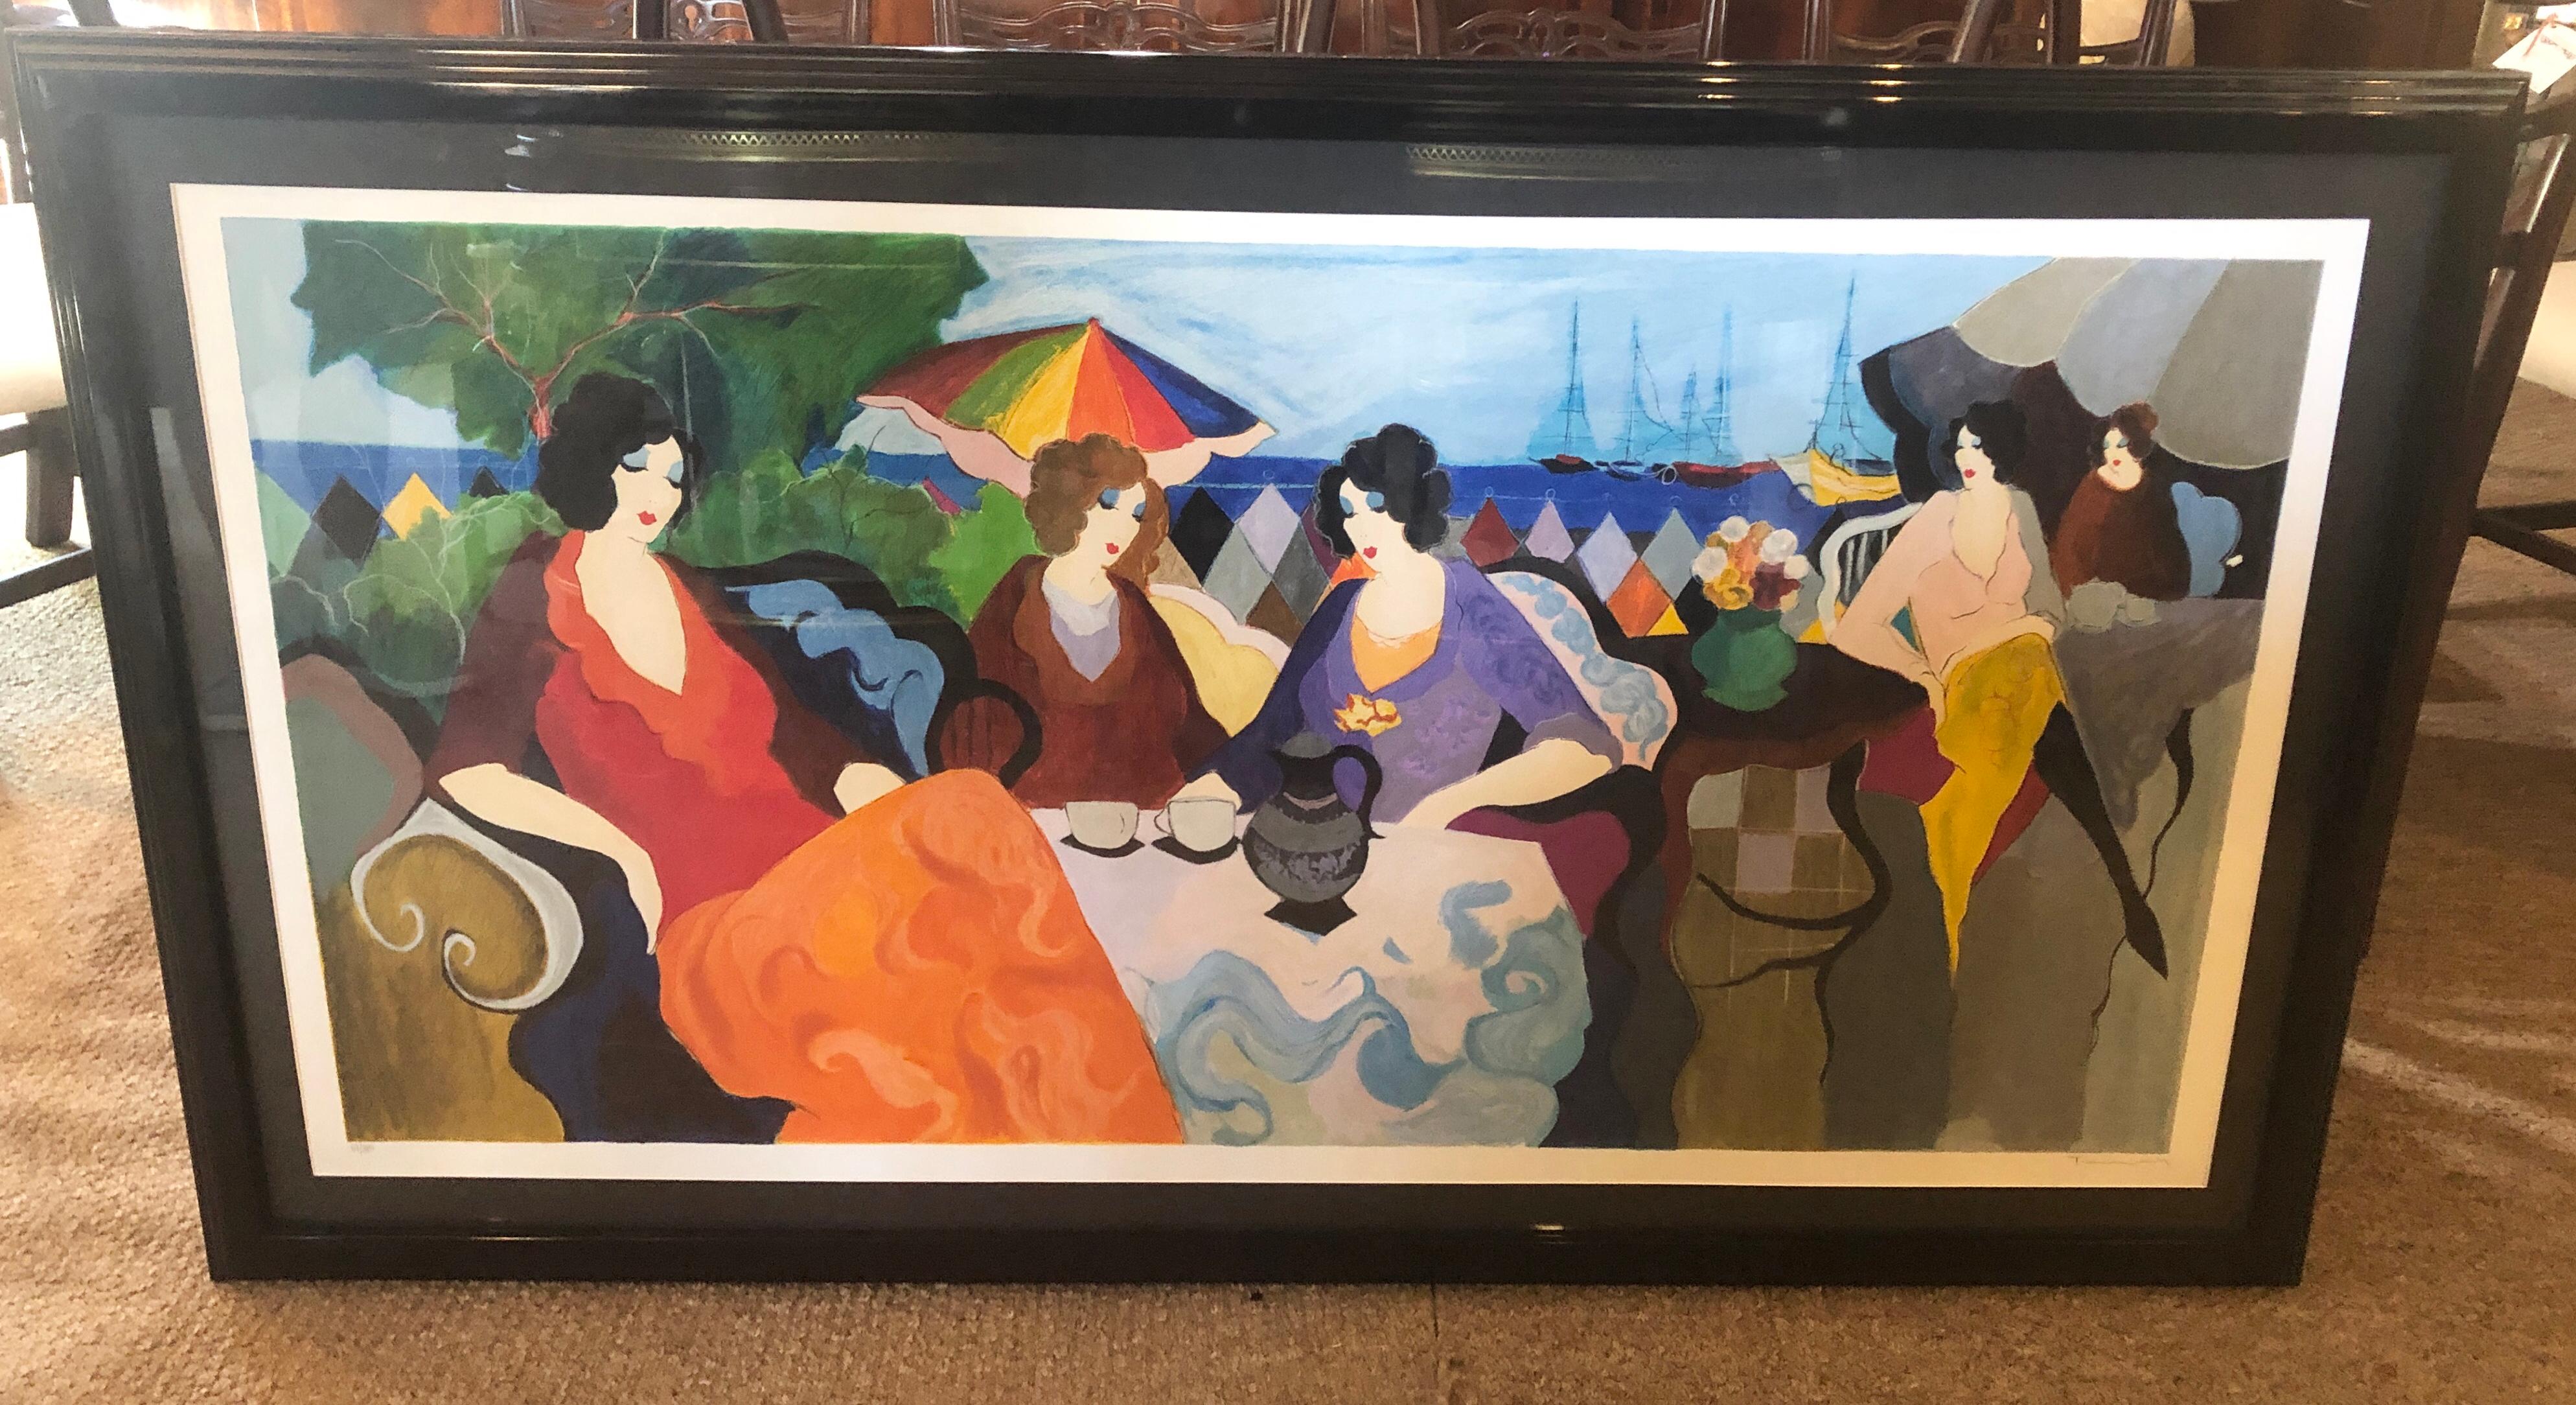 Large Tarkay depicting 5 Women in Cannes. Stereo Lithograph, pencil signed and numbered Tarkay lower right 69/375 in a fine black lacquered frame under plexiglass.
Itzchak Tarkay is considered to be a key figure in the modern figurative movement.